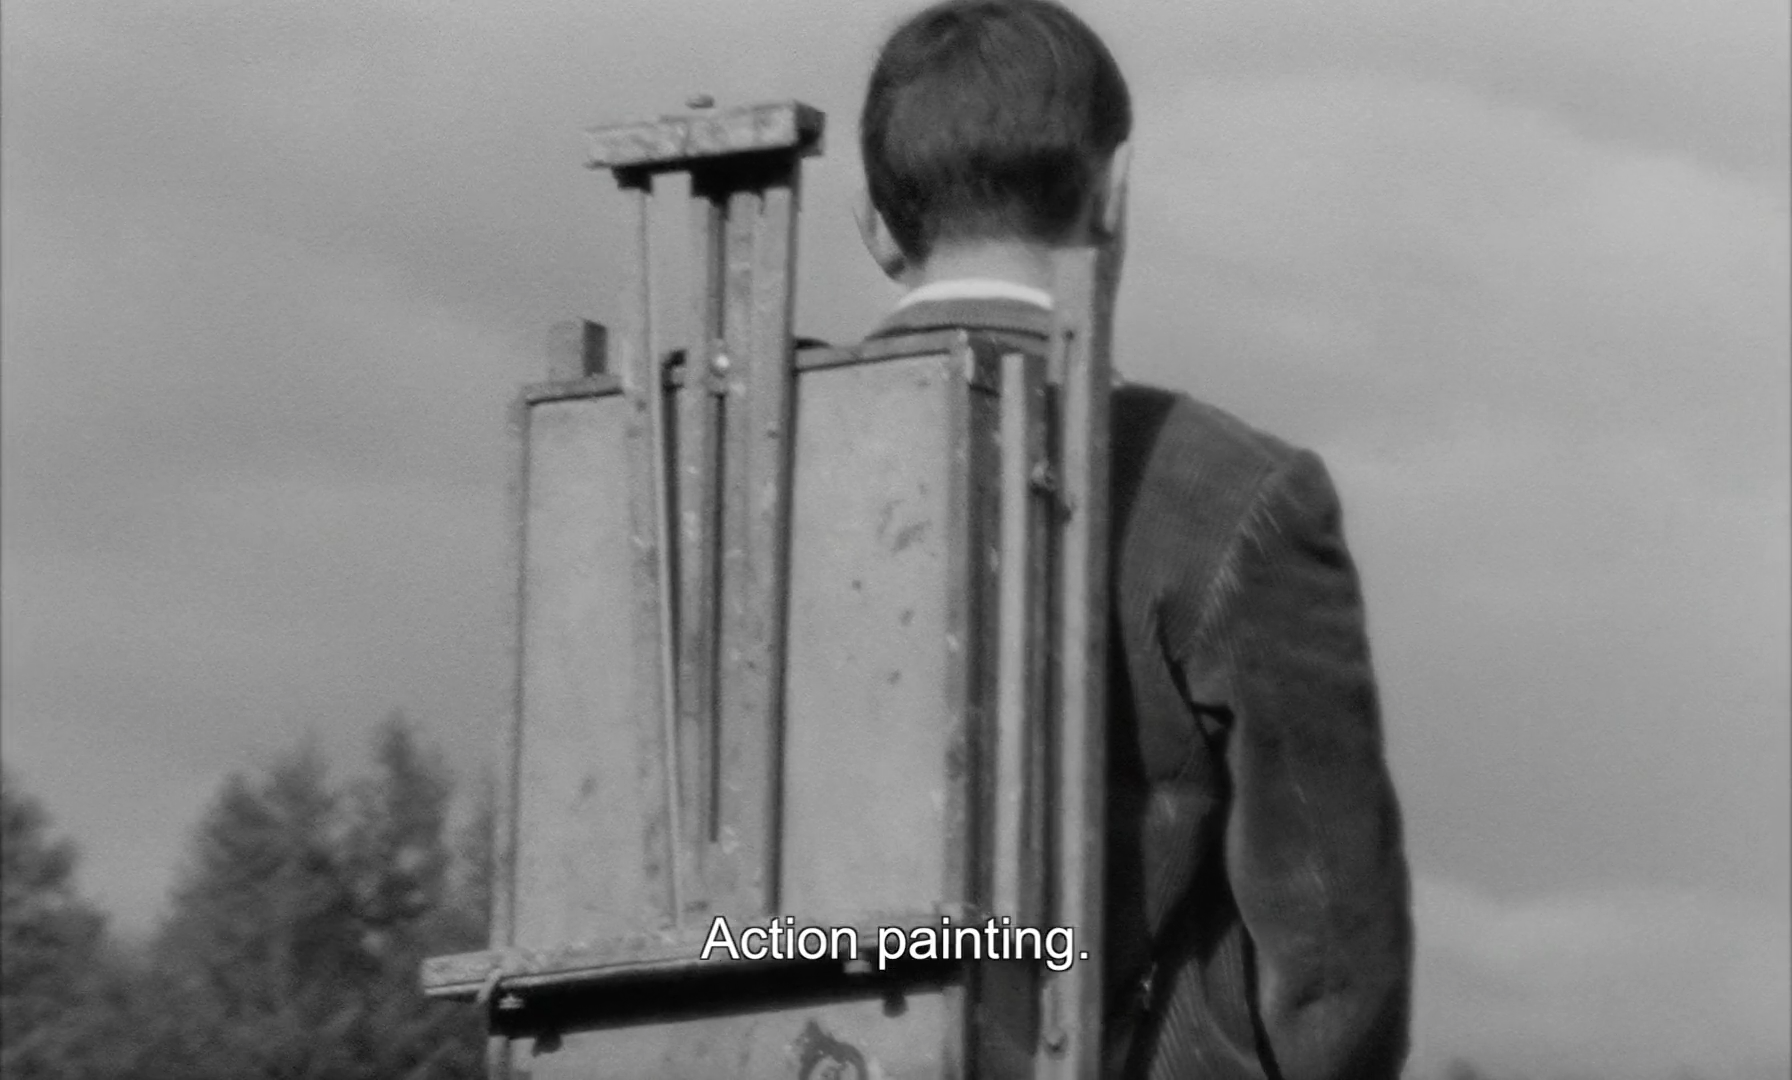 Au Hasard Balthazar Robert Bresson A-BitterSweet-Life Action Painting 7.png